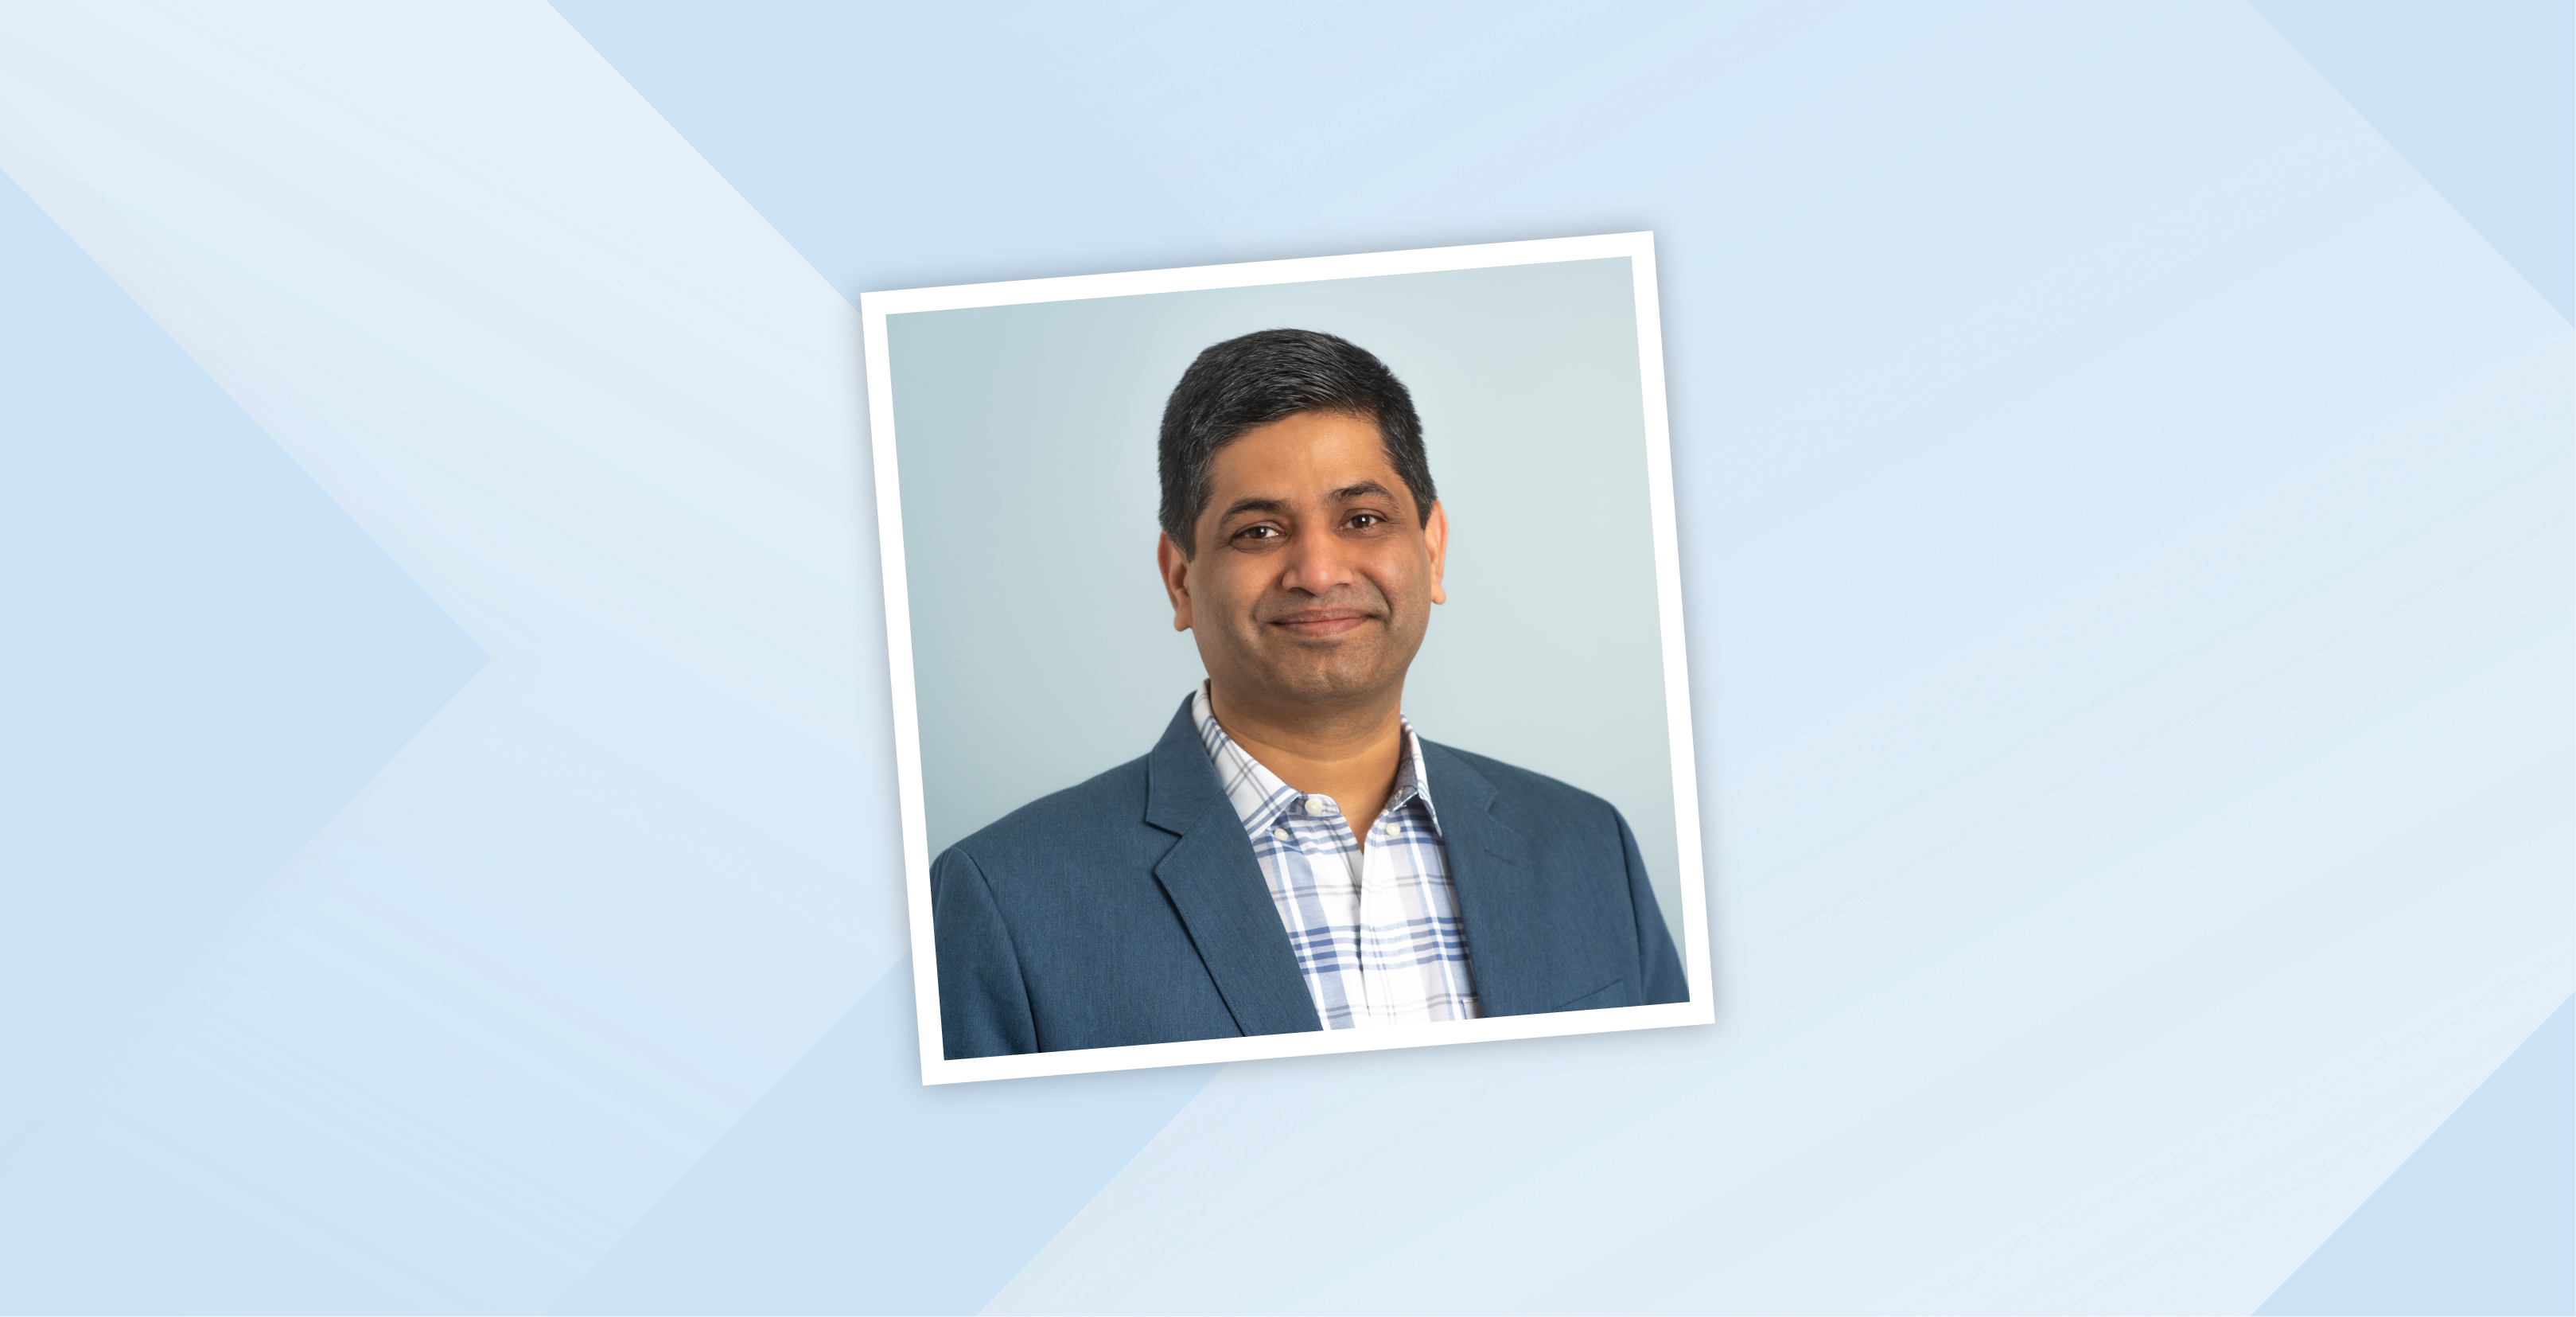 Nagesh Goteti, VP of Technology at Eastridge Workforce Solutions